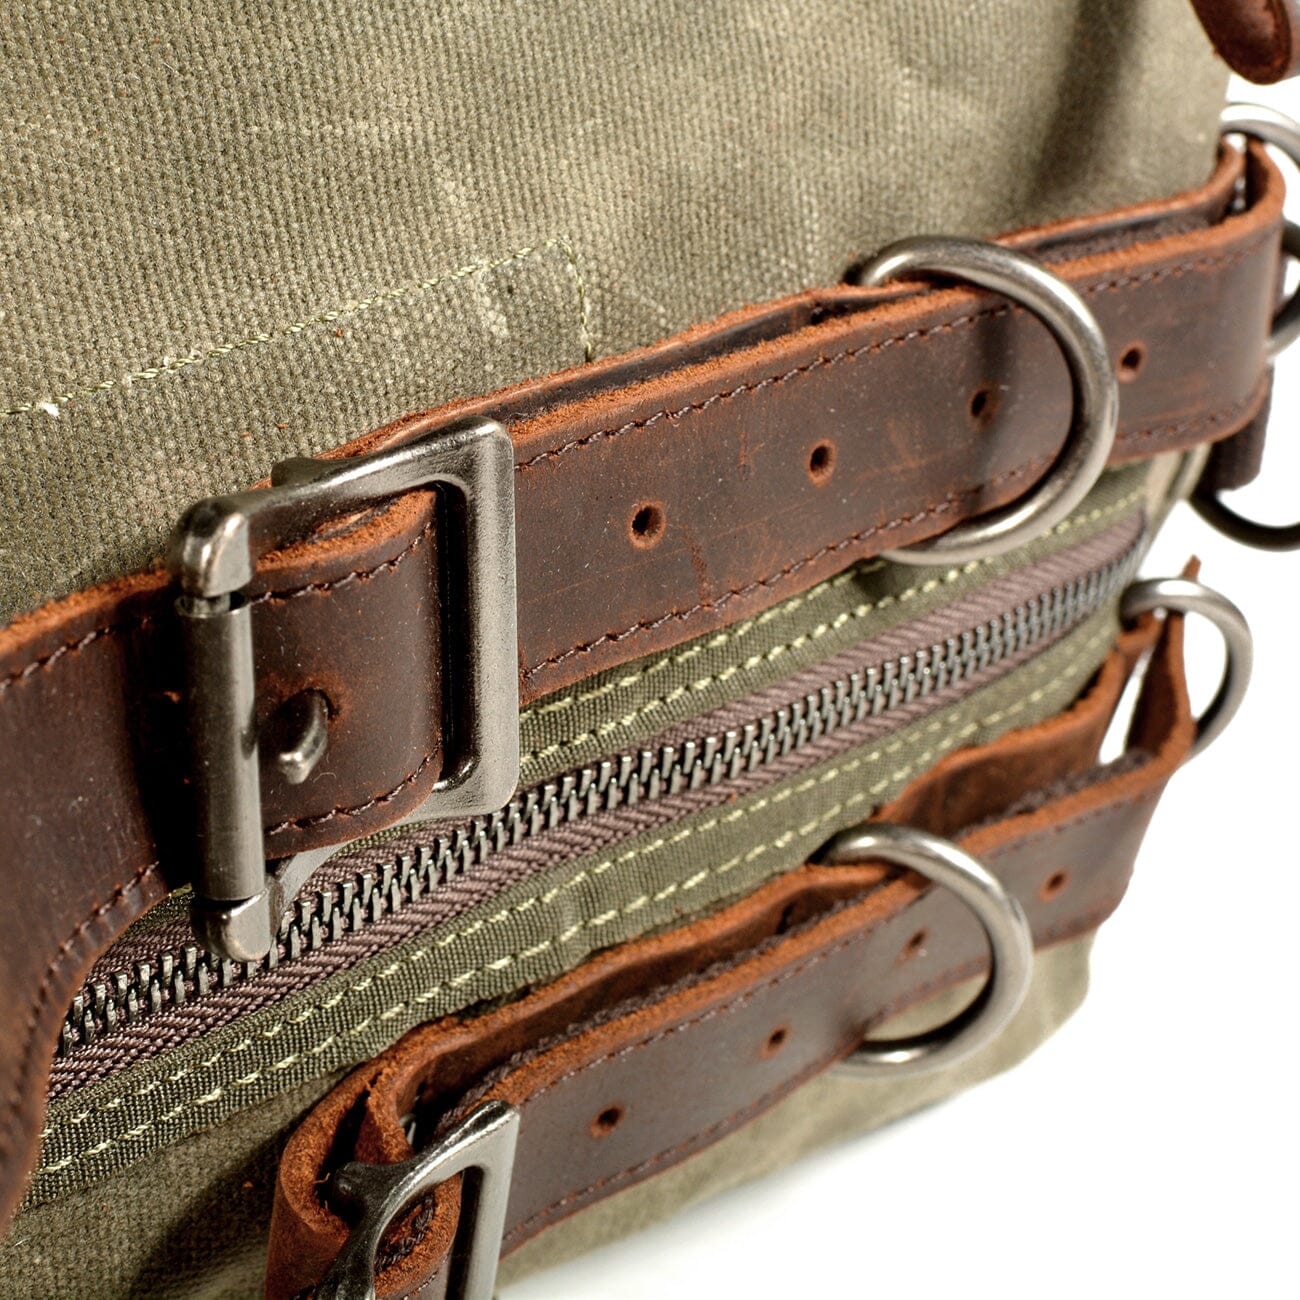 leather straps metallic buckles green waxed cotton canvas